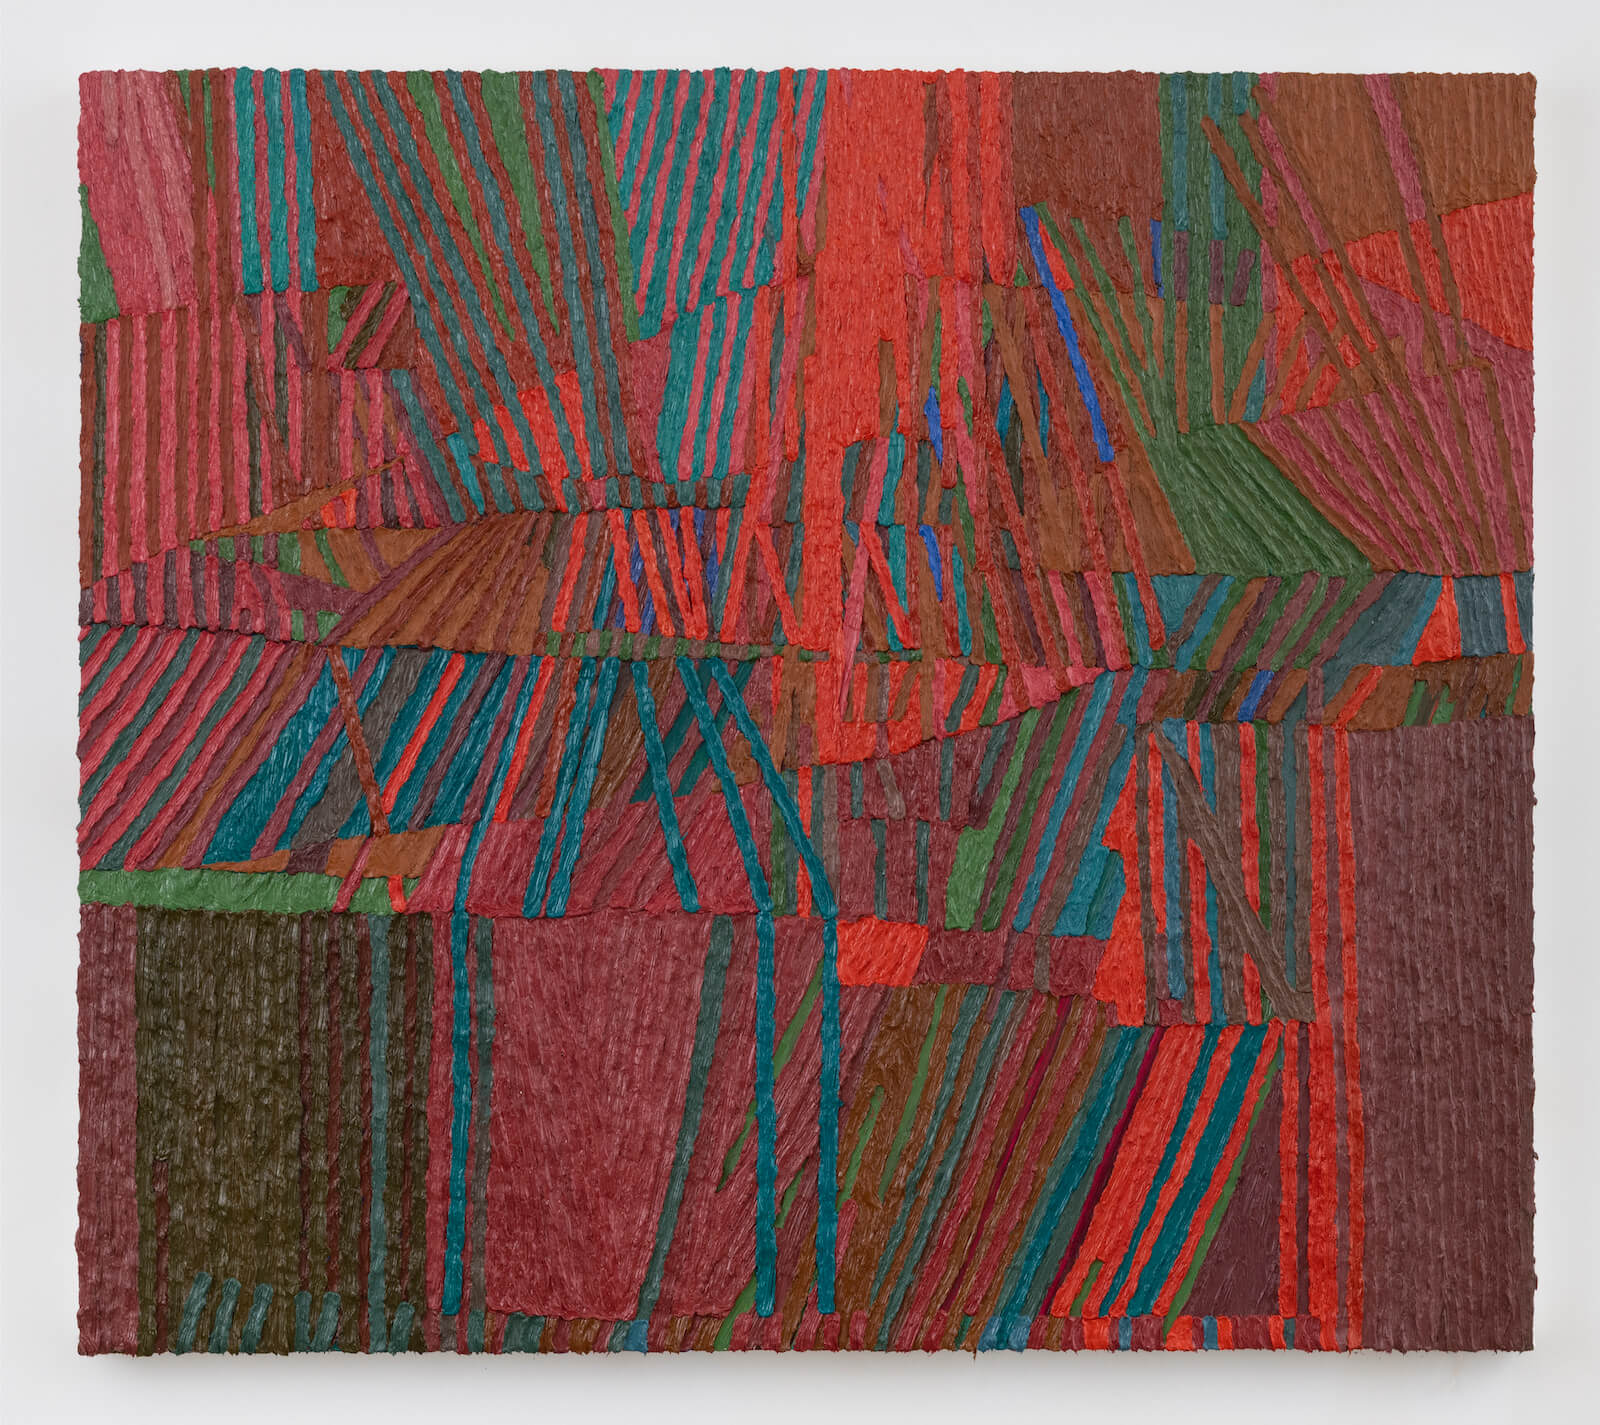 painting: Brett Baker, Porch and palm II, oil on canvas, 41 x 47 inches, 2018-2019